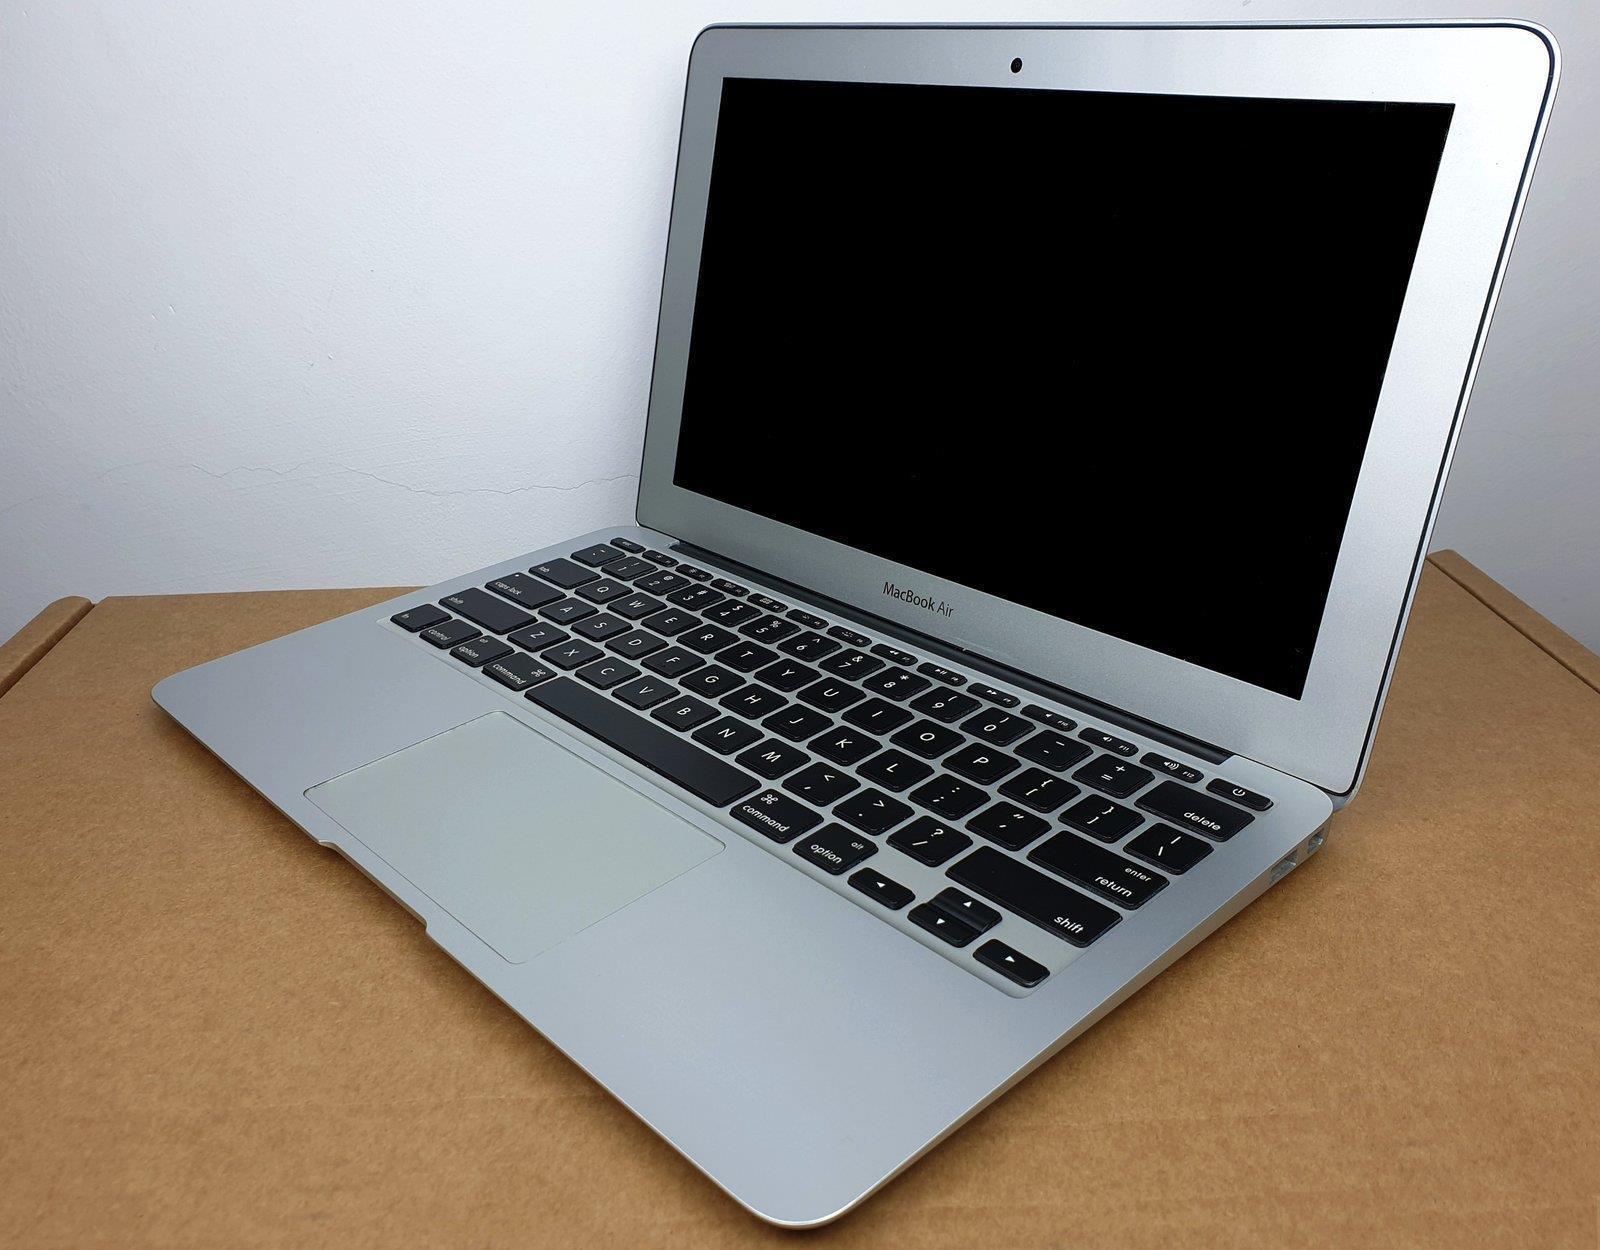 what is the latest os for macbook air model a1465